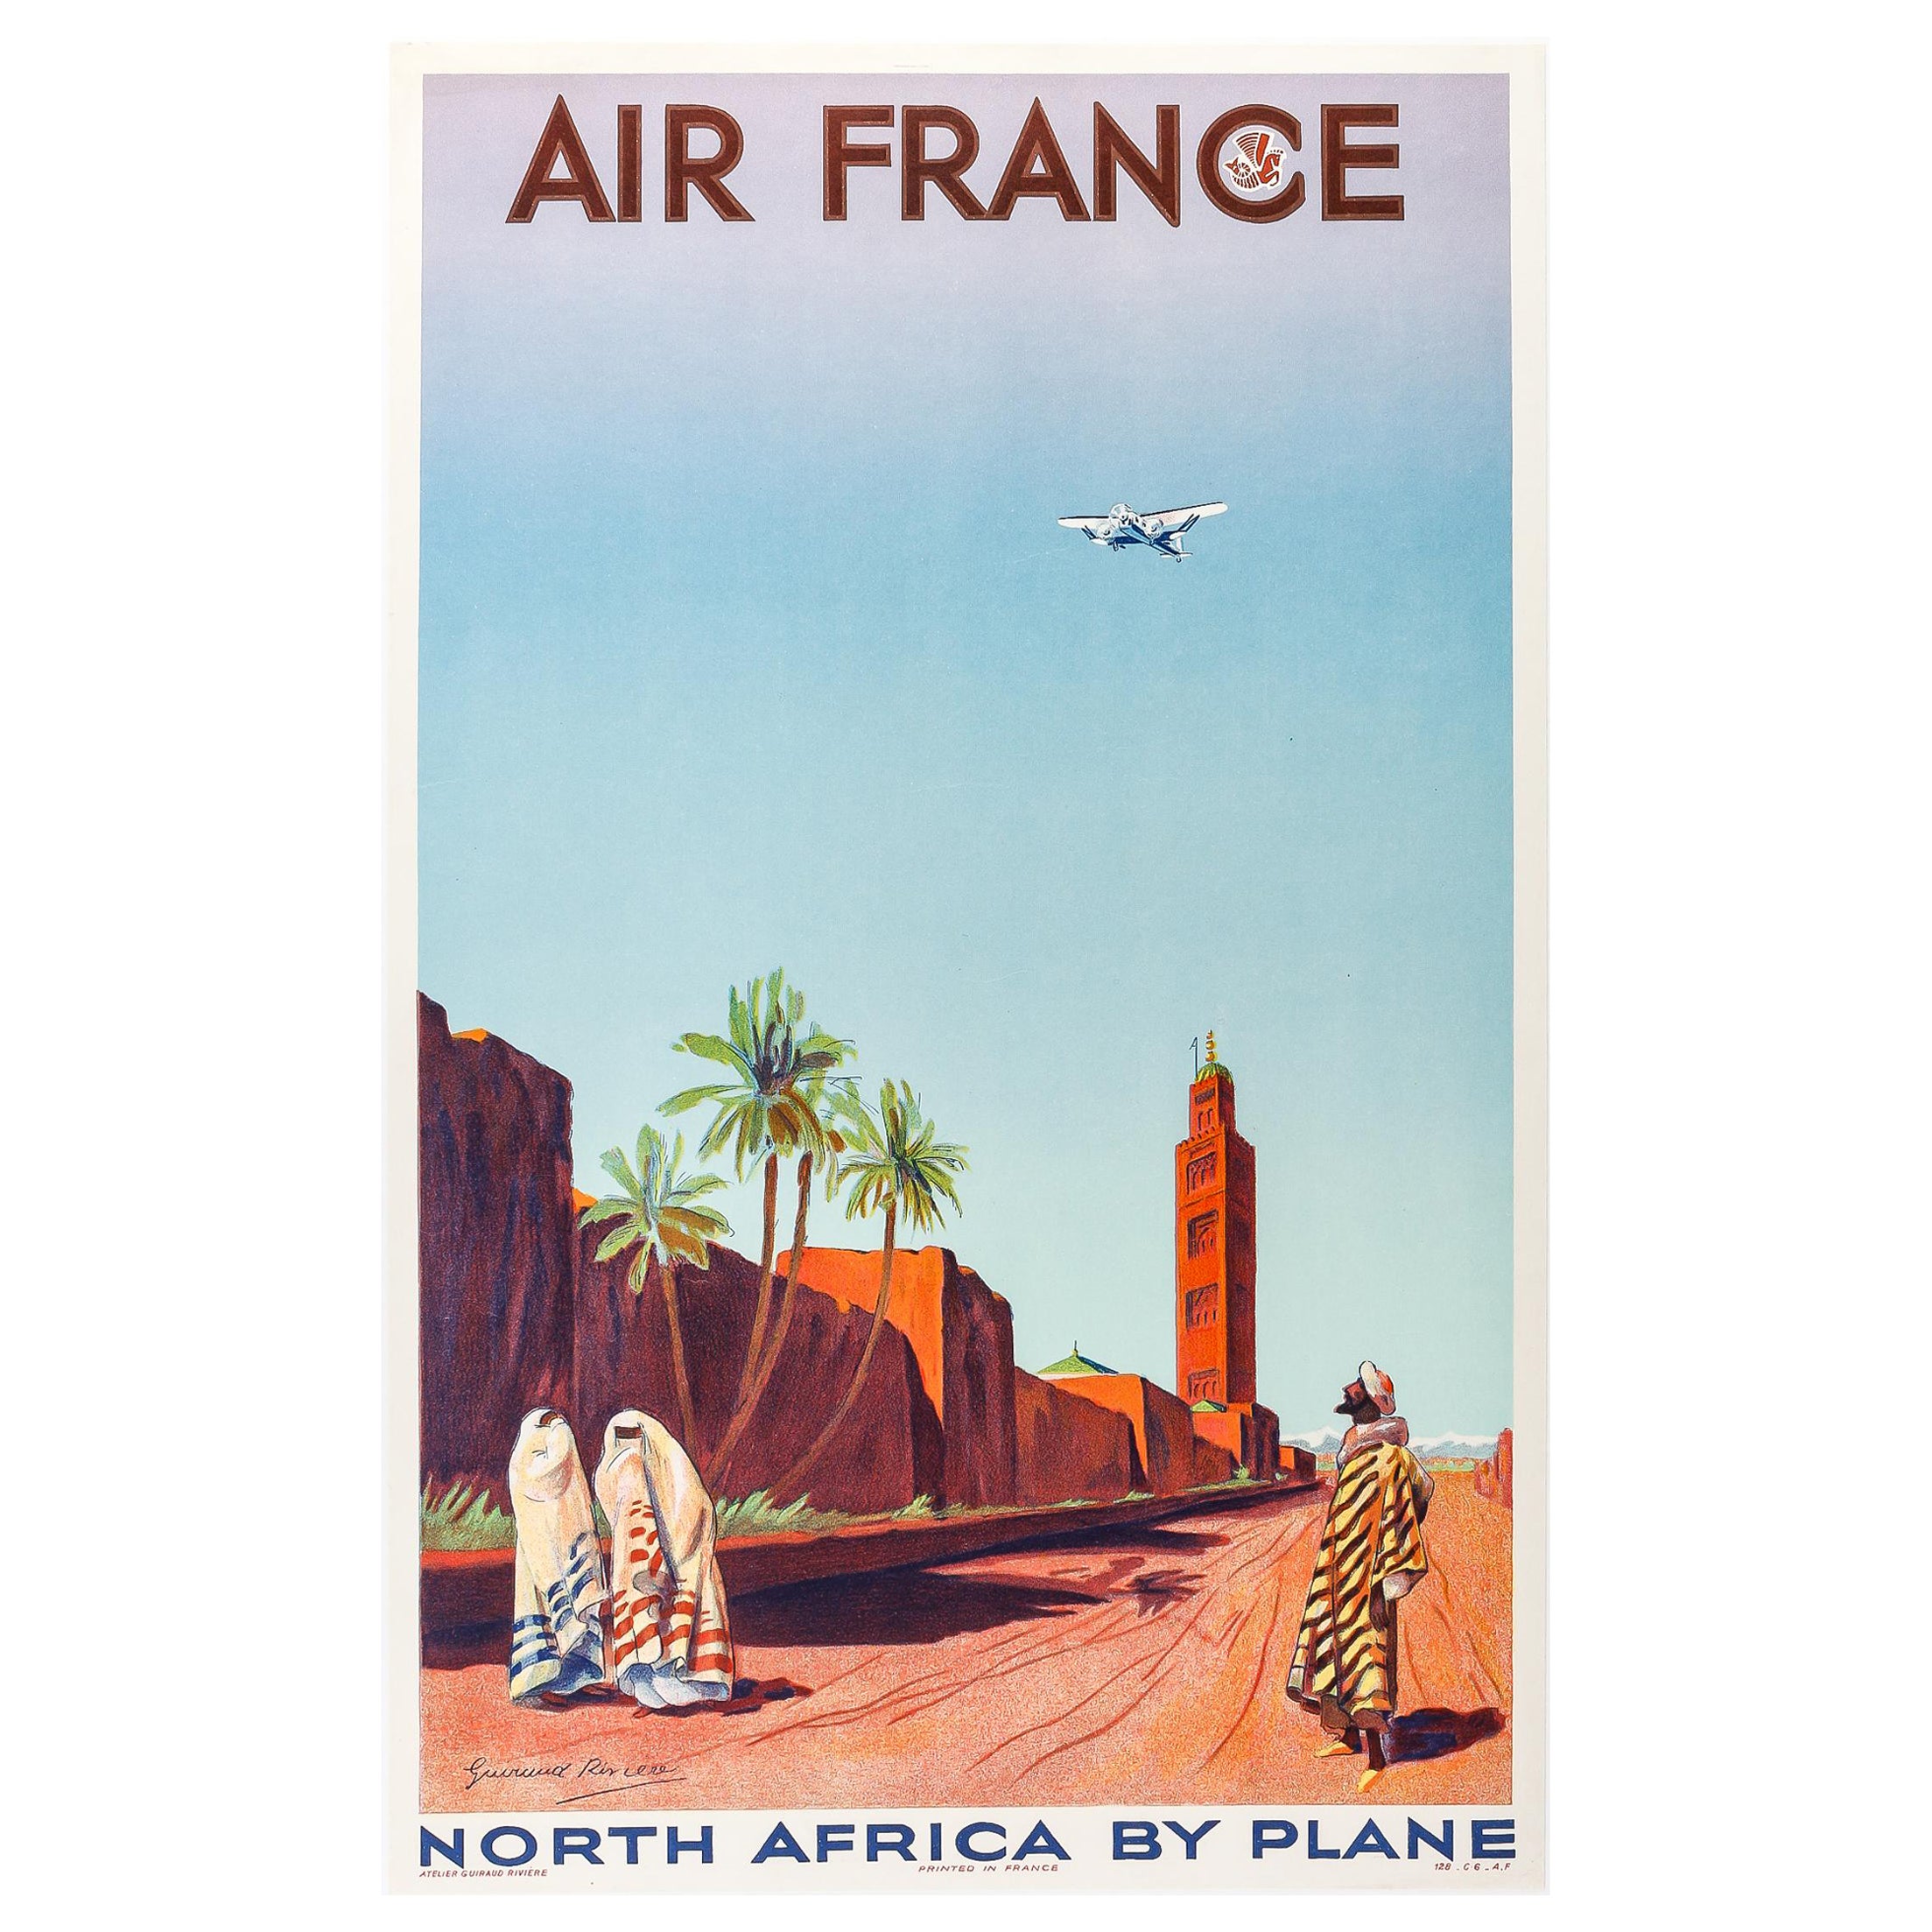 Original Air France Poster, North Africa by plane, Morocco Atlas, Koutoubia 1934 For Sale